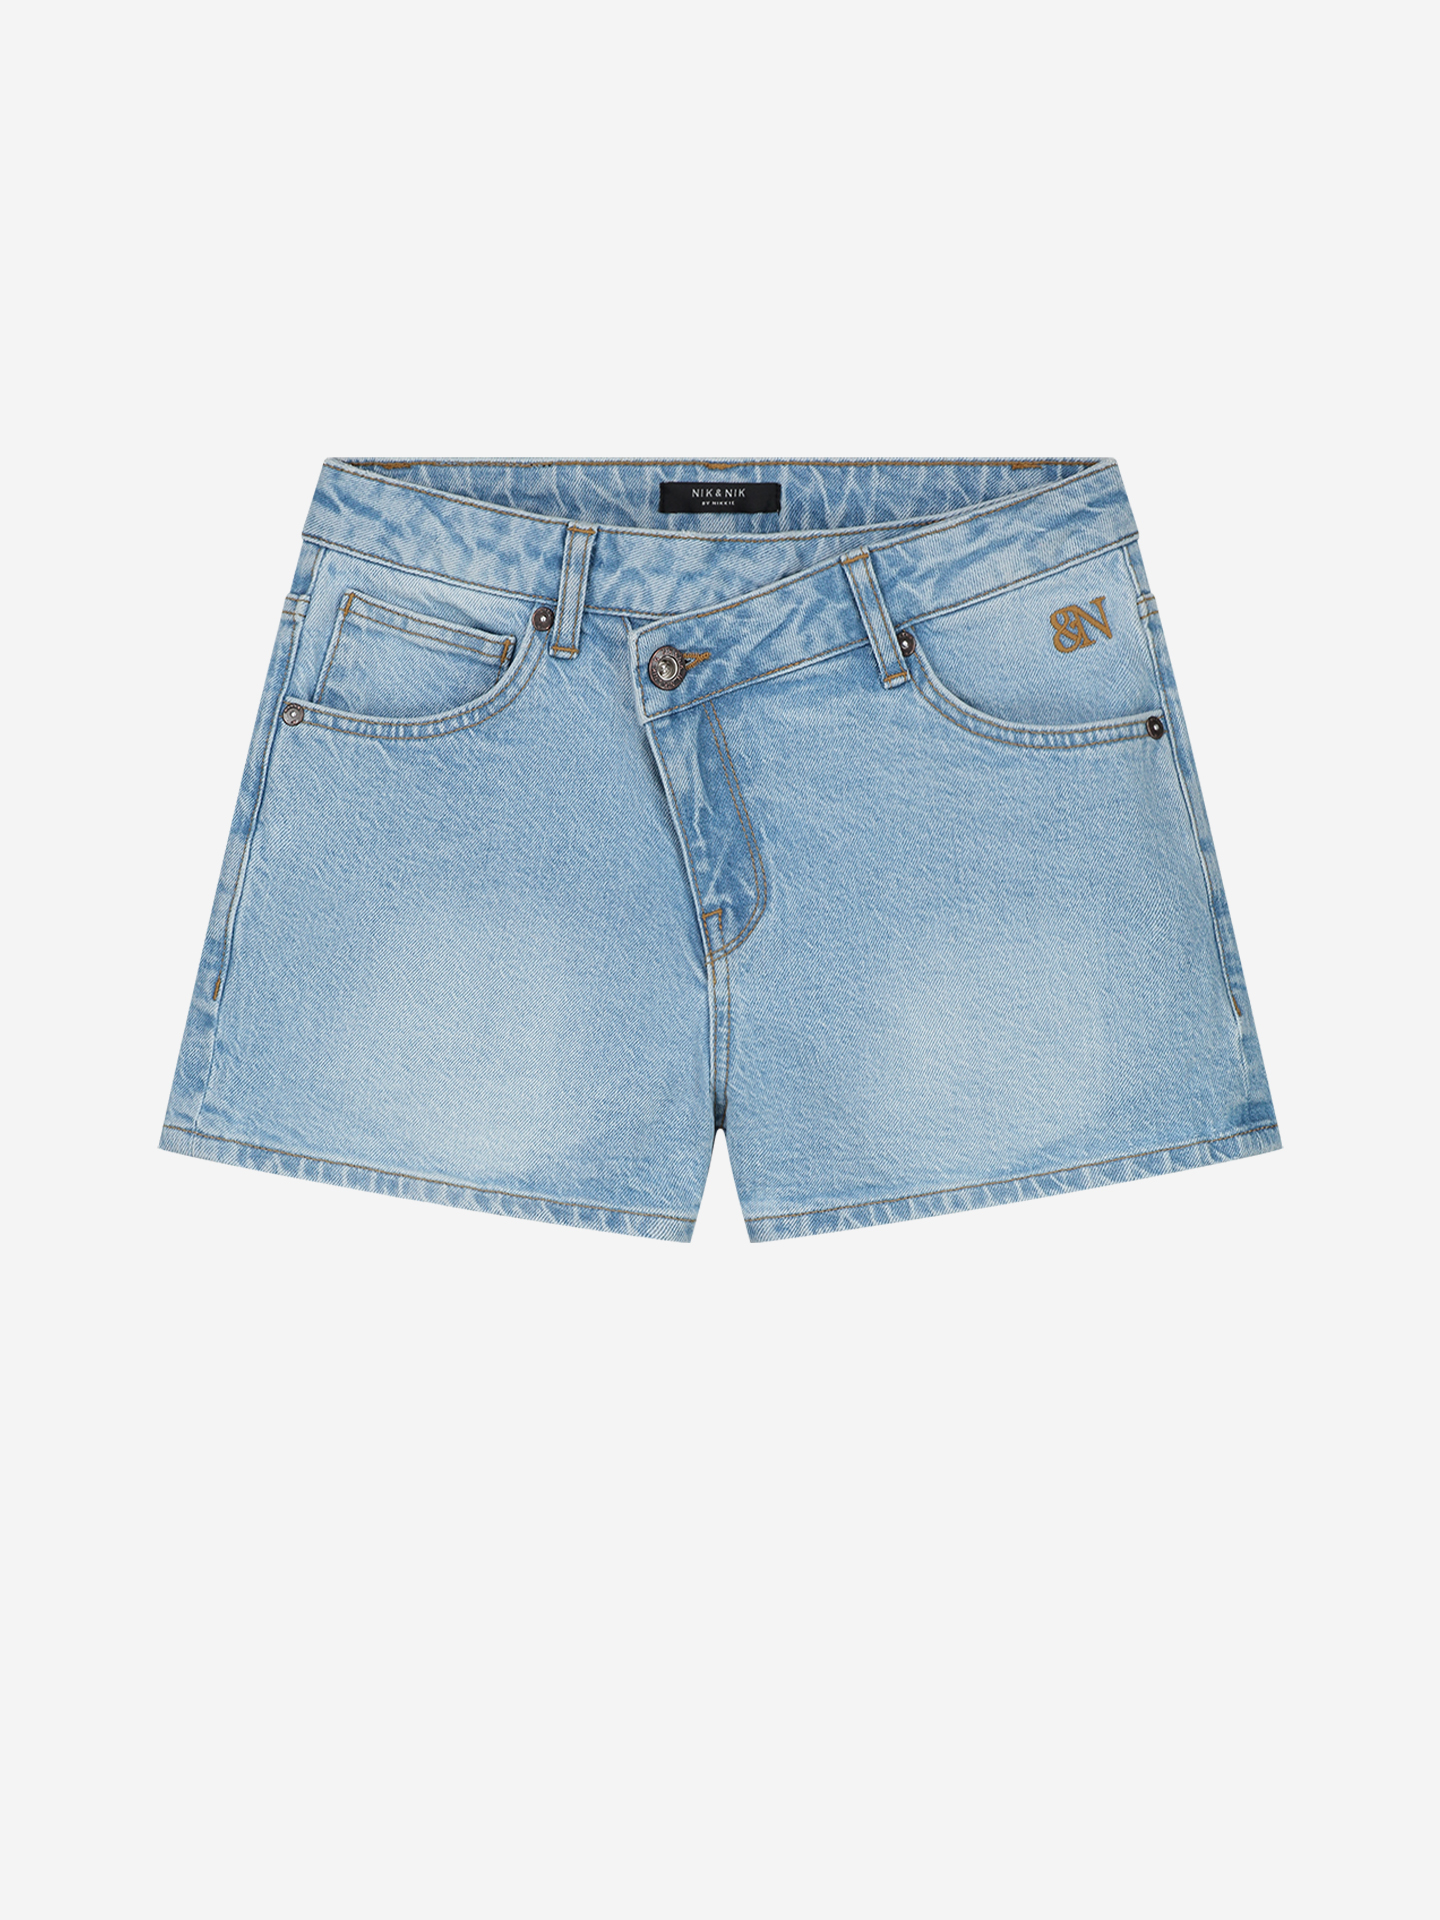 Denim short with cross over button